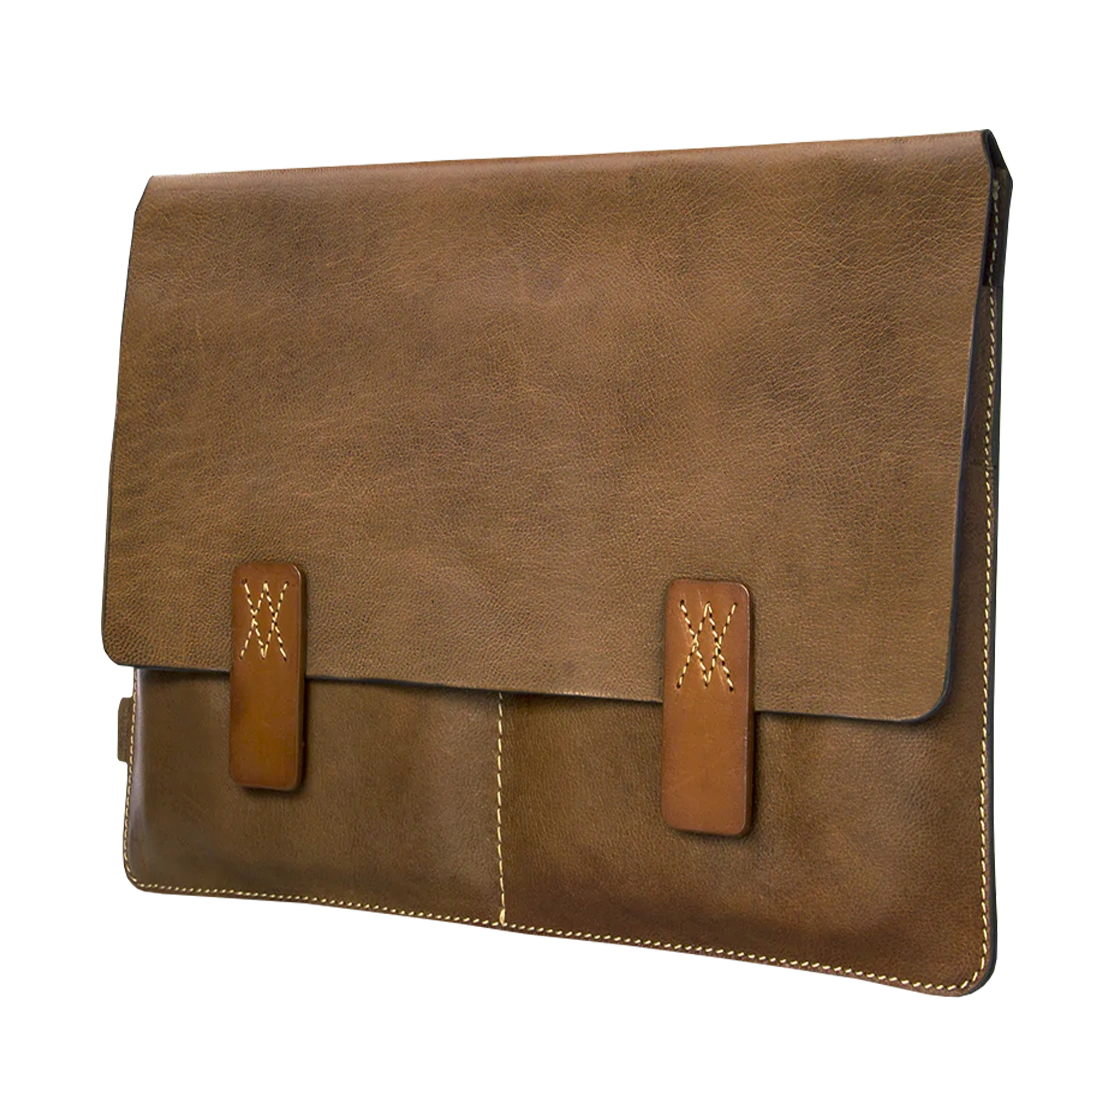 vorya-premium-natural-leather-cover-for-macbook-12-inch